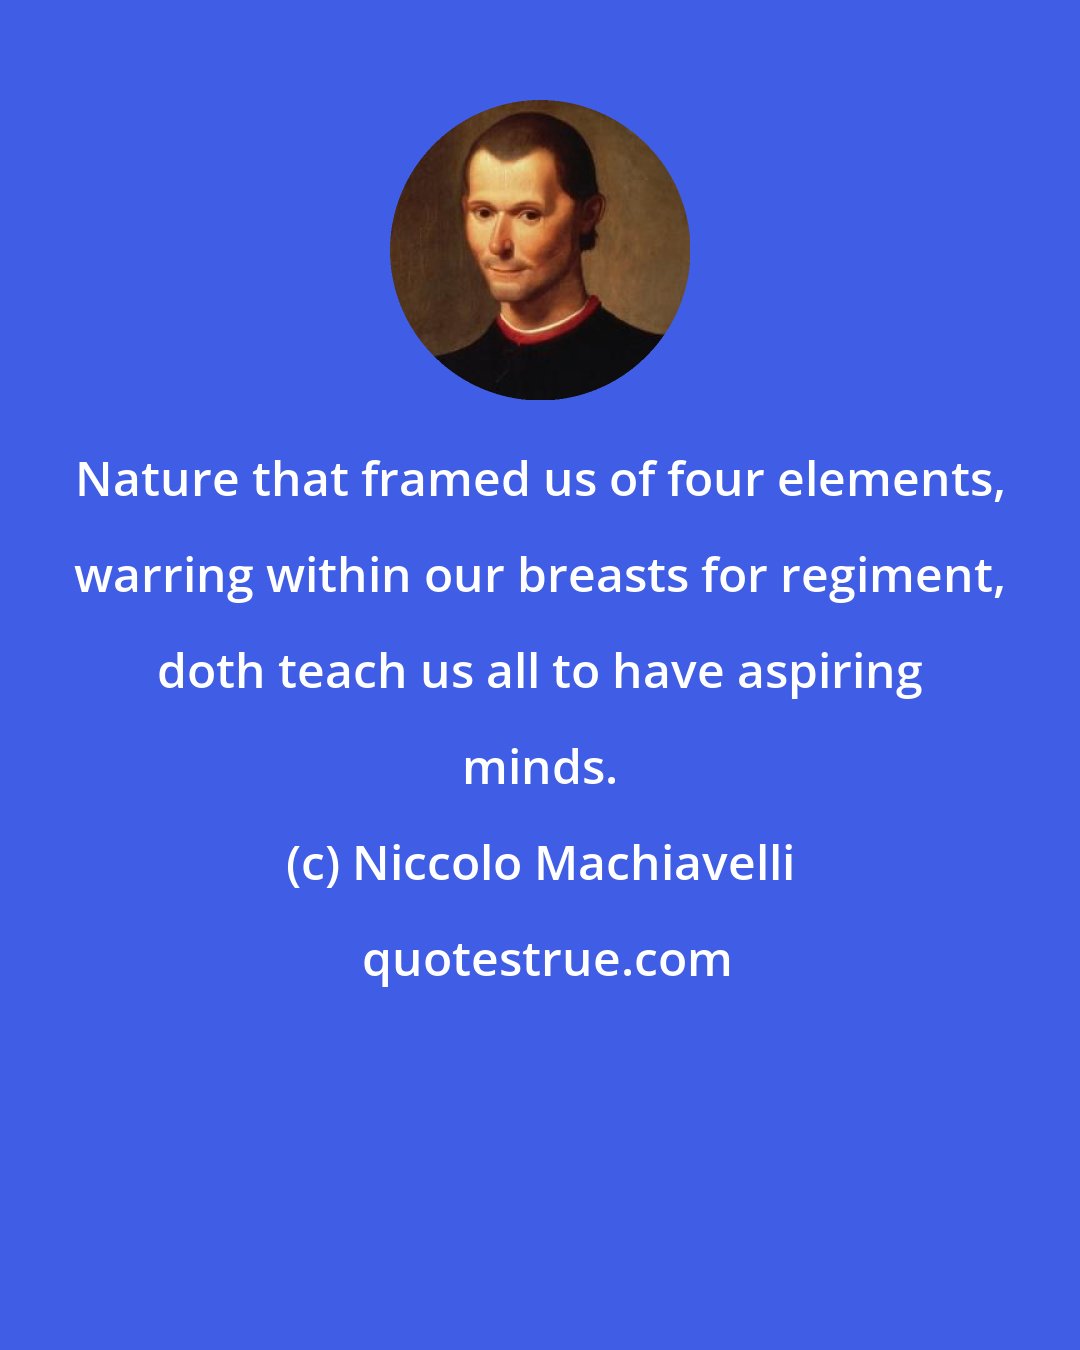 Niccolo Machiavelli: Nature that framed us of four elements, warring within our breasts for regiment, doth teach us all to have aspiring minds.